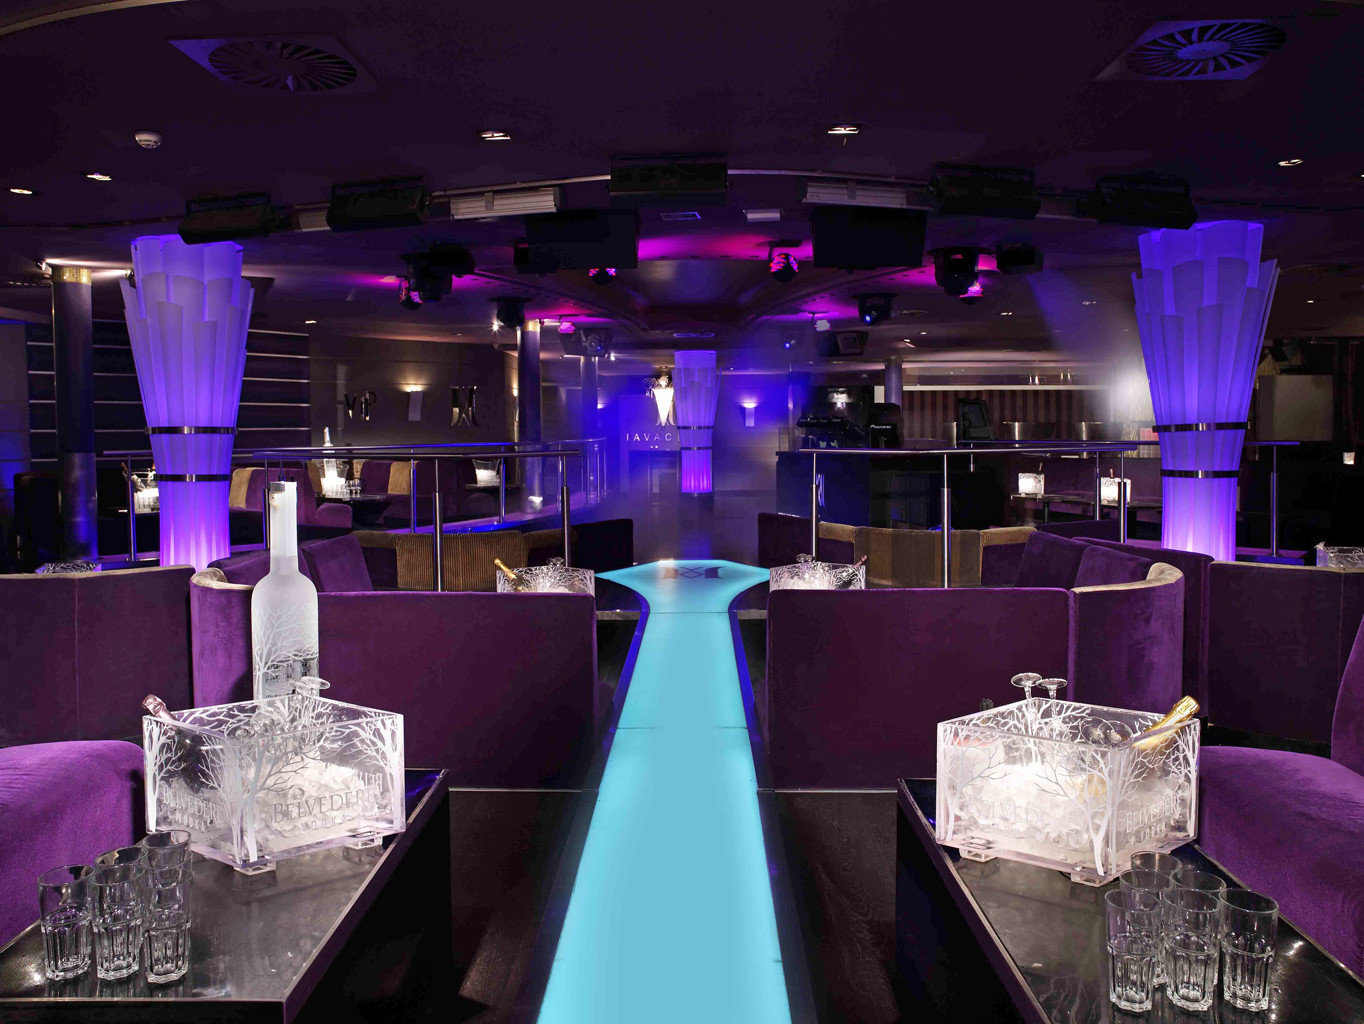 Bar Drink Eat Hip Lounge Travel Trends Trip Ideas indoor ceiling purple function hall meal nightclub banquet wedding reception ballroom colored several